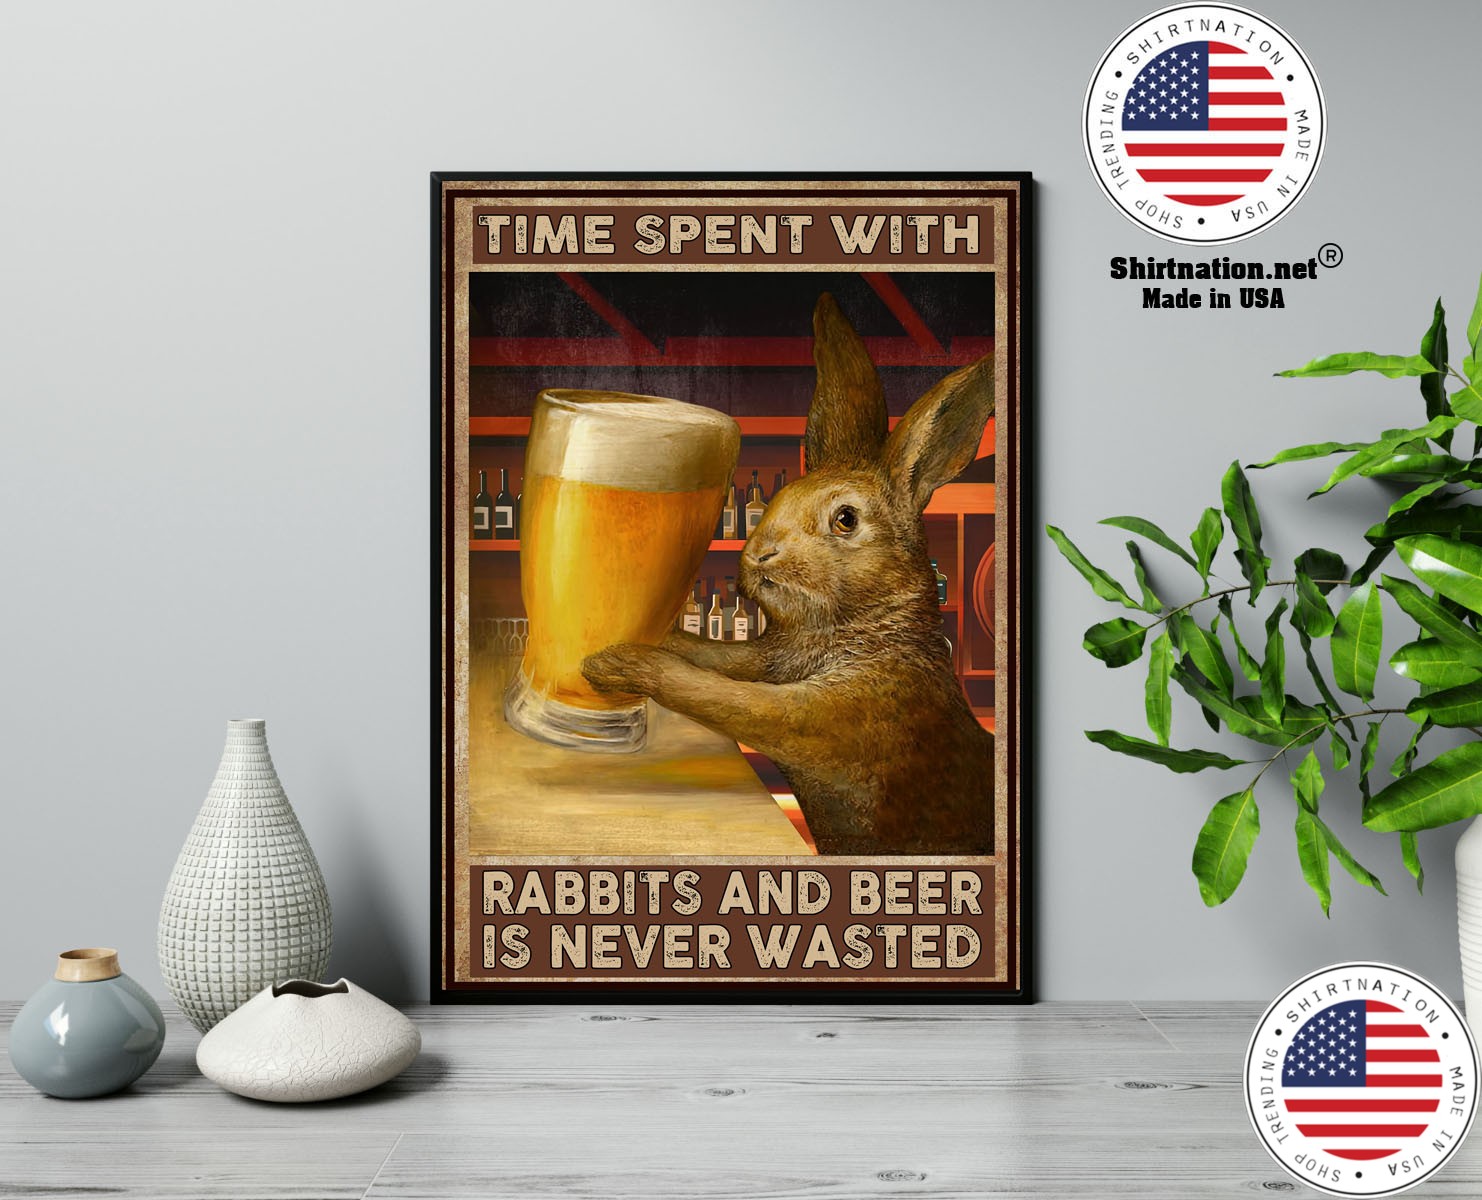 Time spent with rabbits and beer is never wasted poster 13